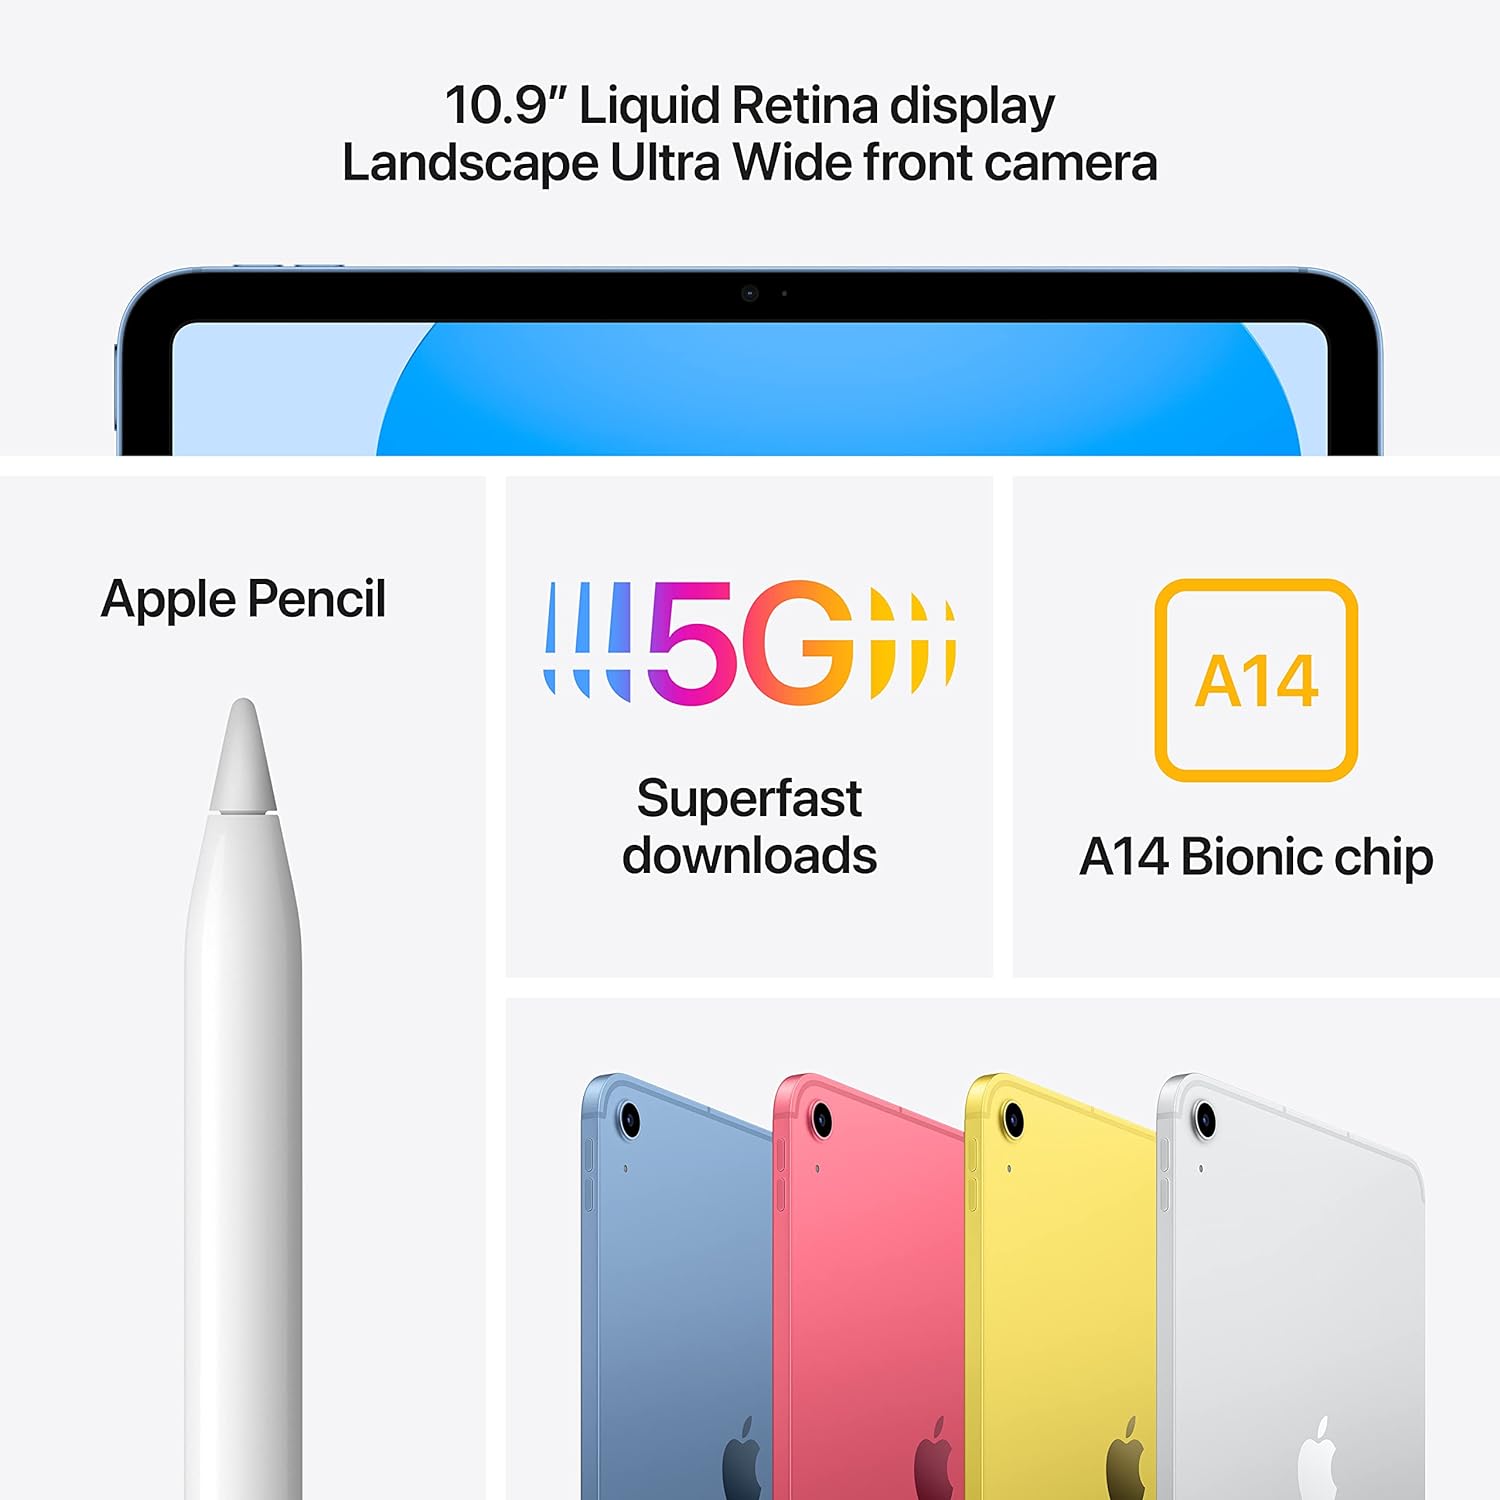 10th Gen iPad - Blue - 256GB - A14 Bionic chip, 12MP cameras, Touch ID, Wi-Fi 6, 5G, USB-C, all-day battery life, iPadOS 16 features. 0194253363514